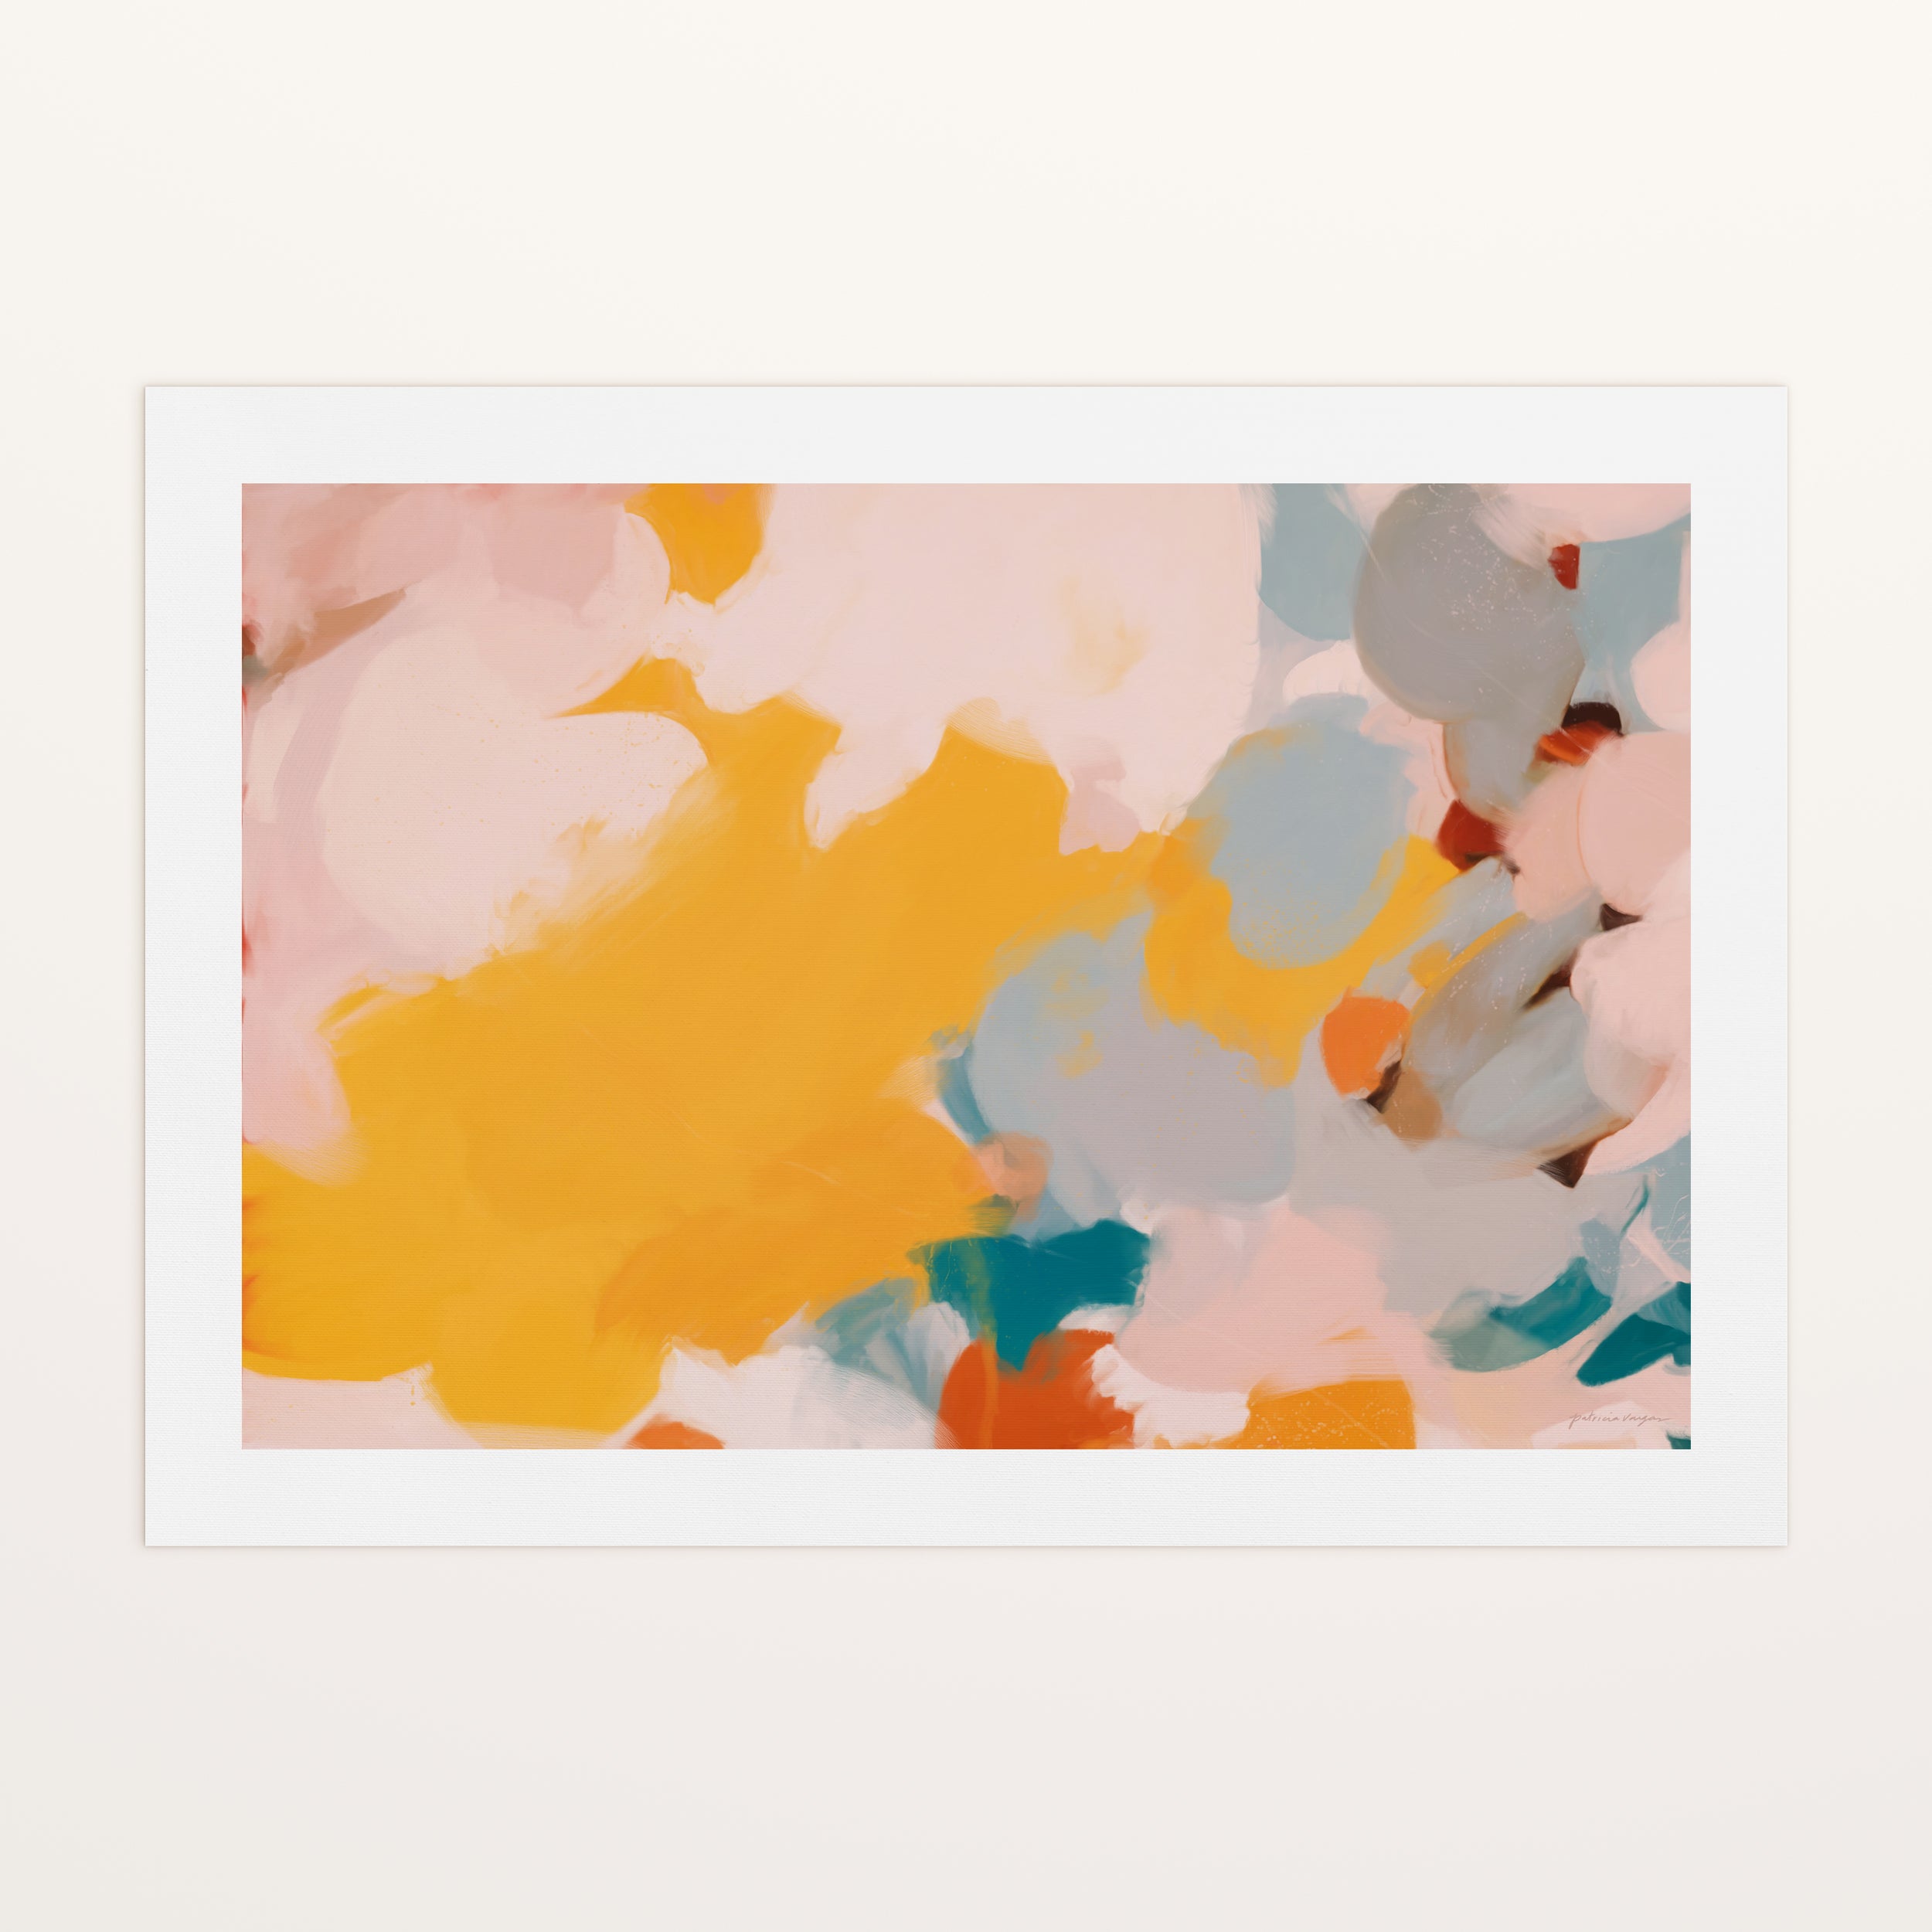 Canary, yellow and blue colorful abstract canvas wall art print by Parima Studio